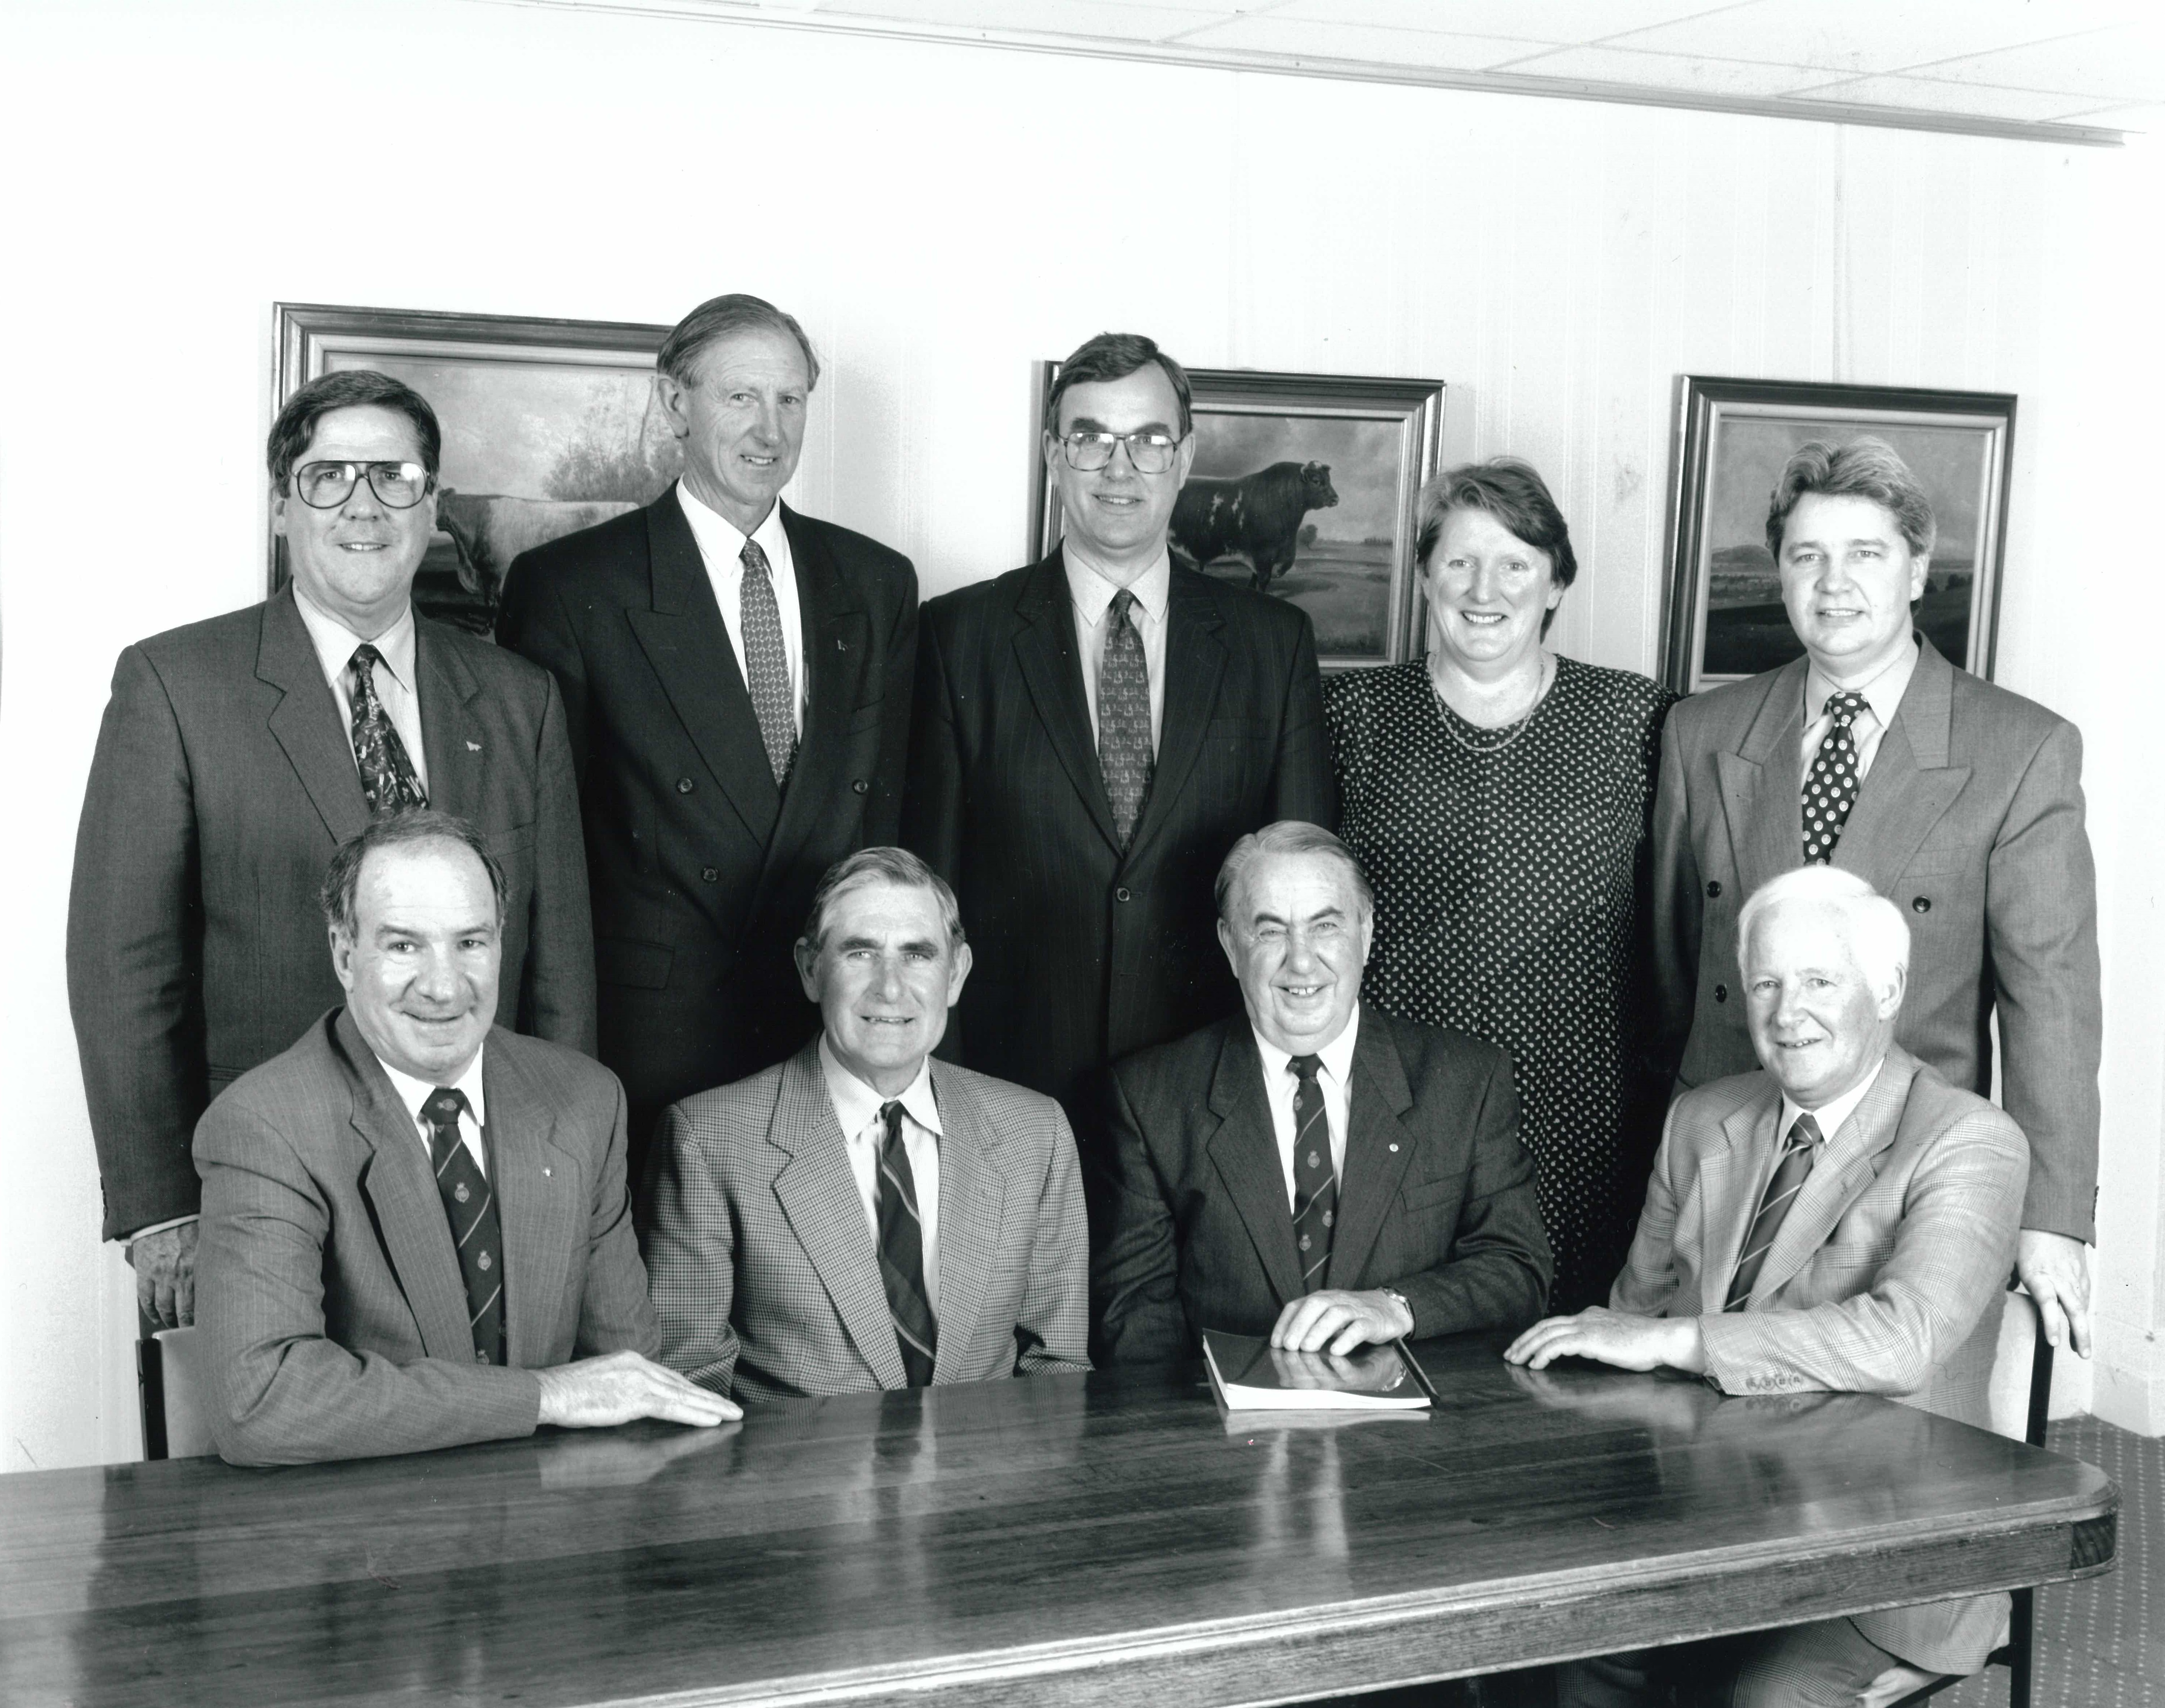 The Royal Agricultural Society of Victoria Board of Directors, February 1997. Peter Payne is in the back row, first on the right. Image source: Melbourne Royal Heritage Collection.